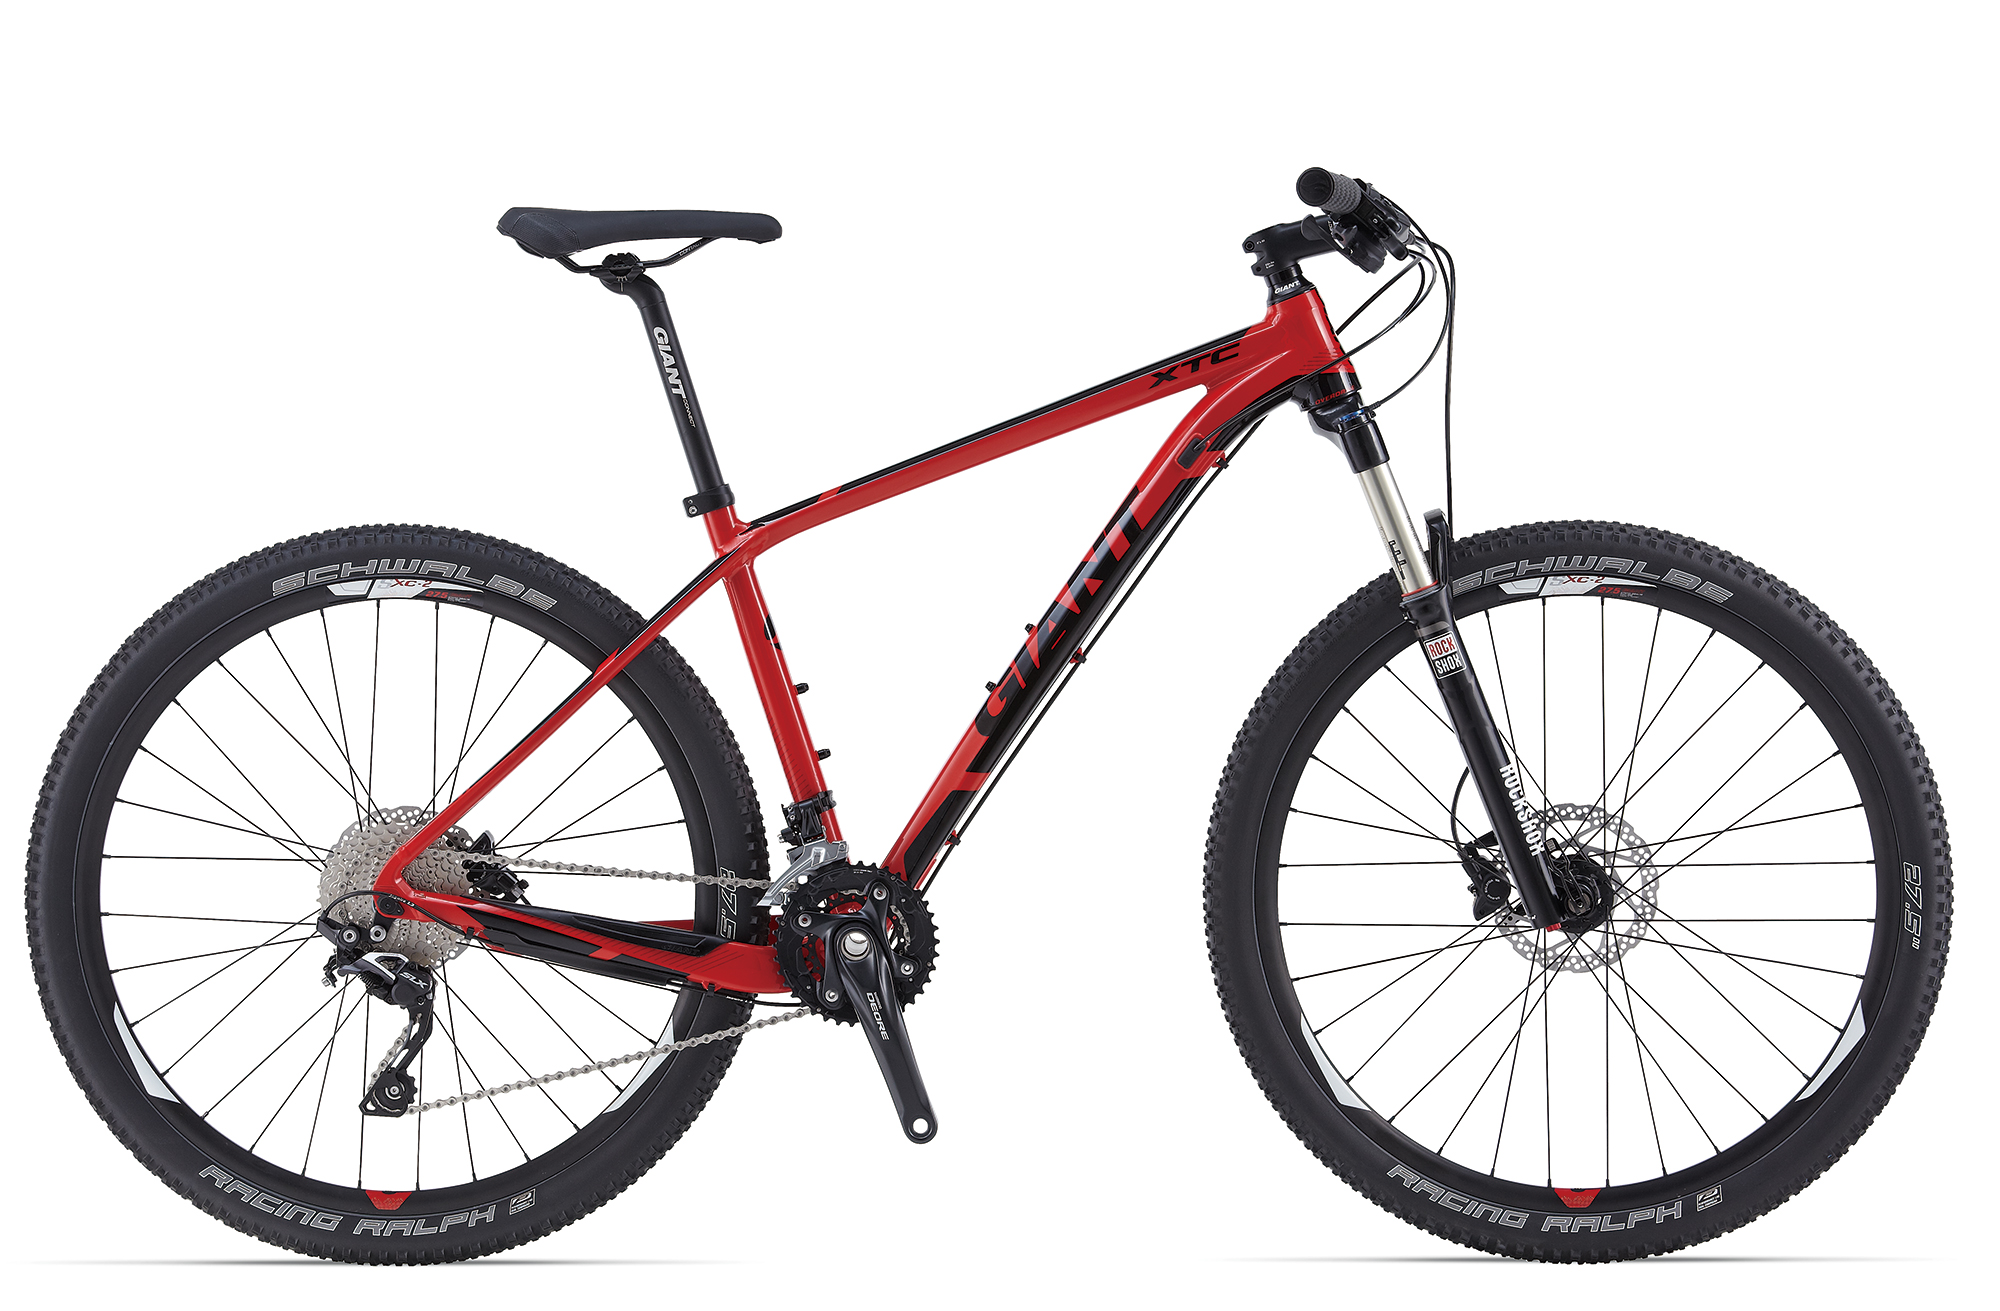 2014 Giant XTC 27.5 2 - Bicycle Details 